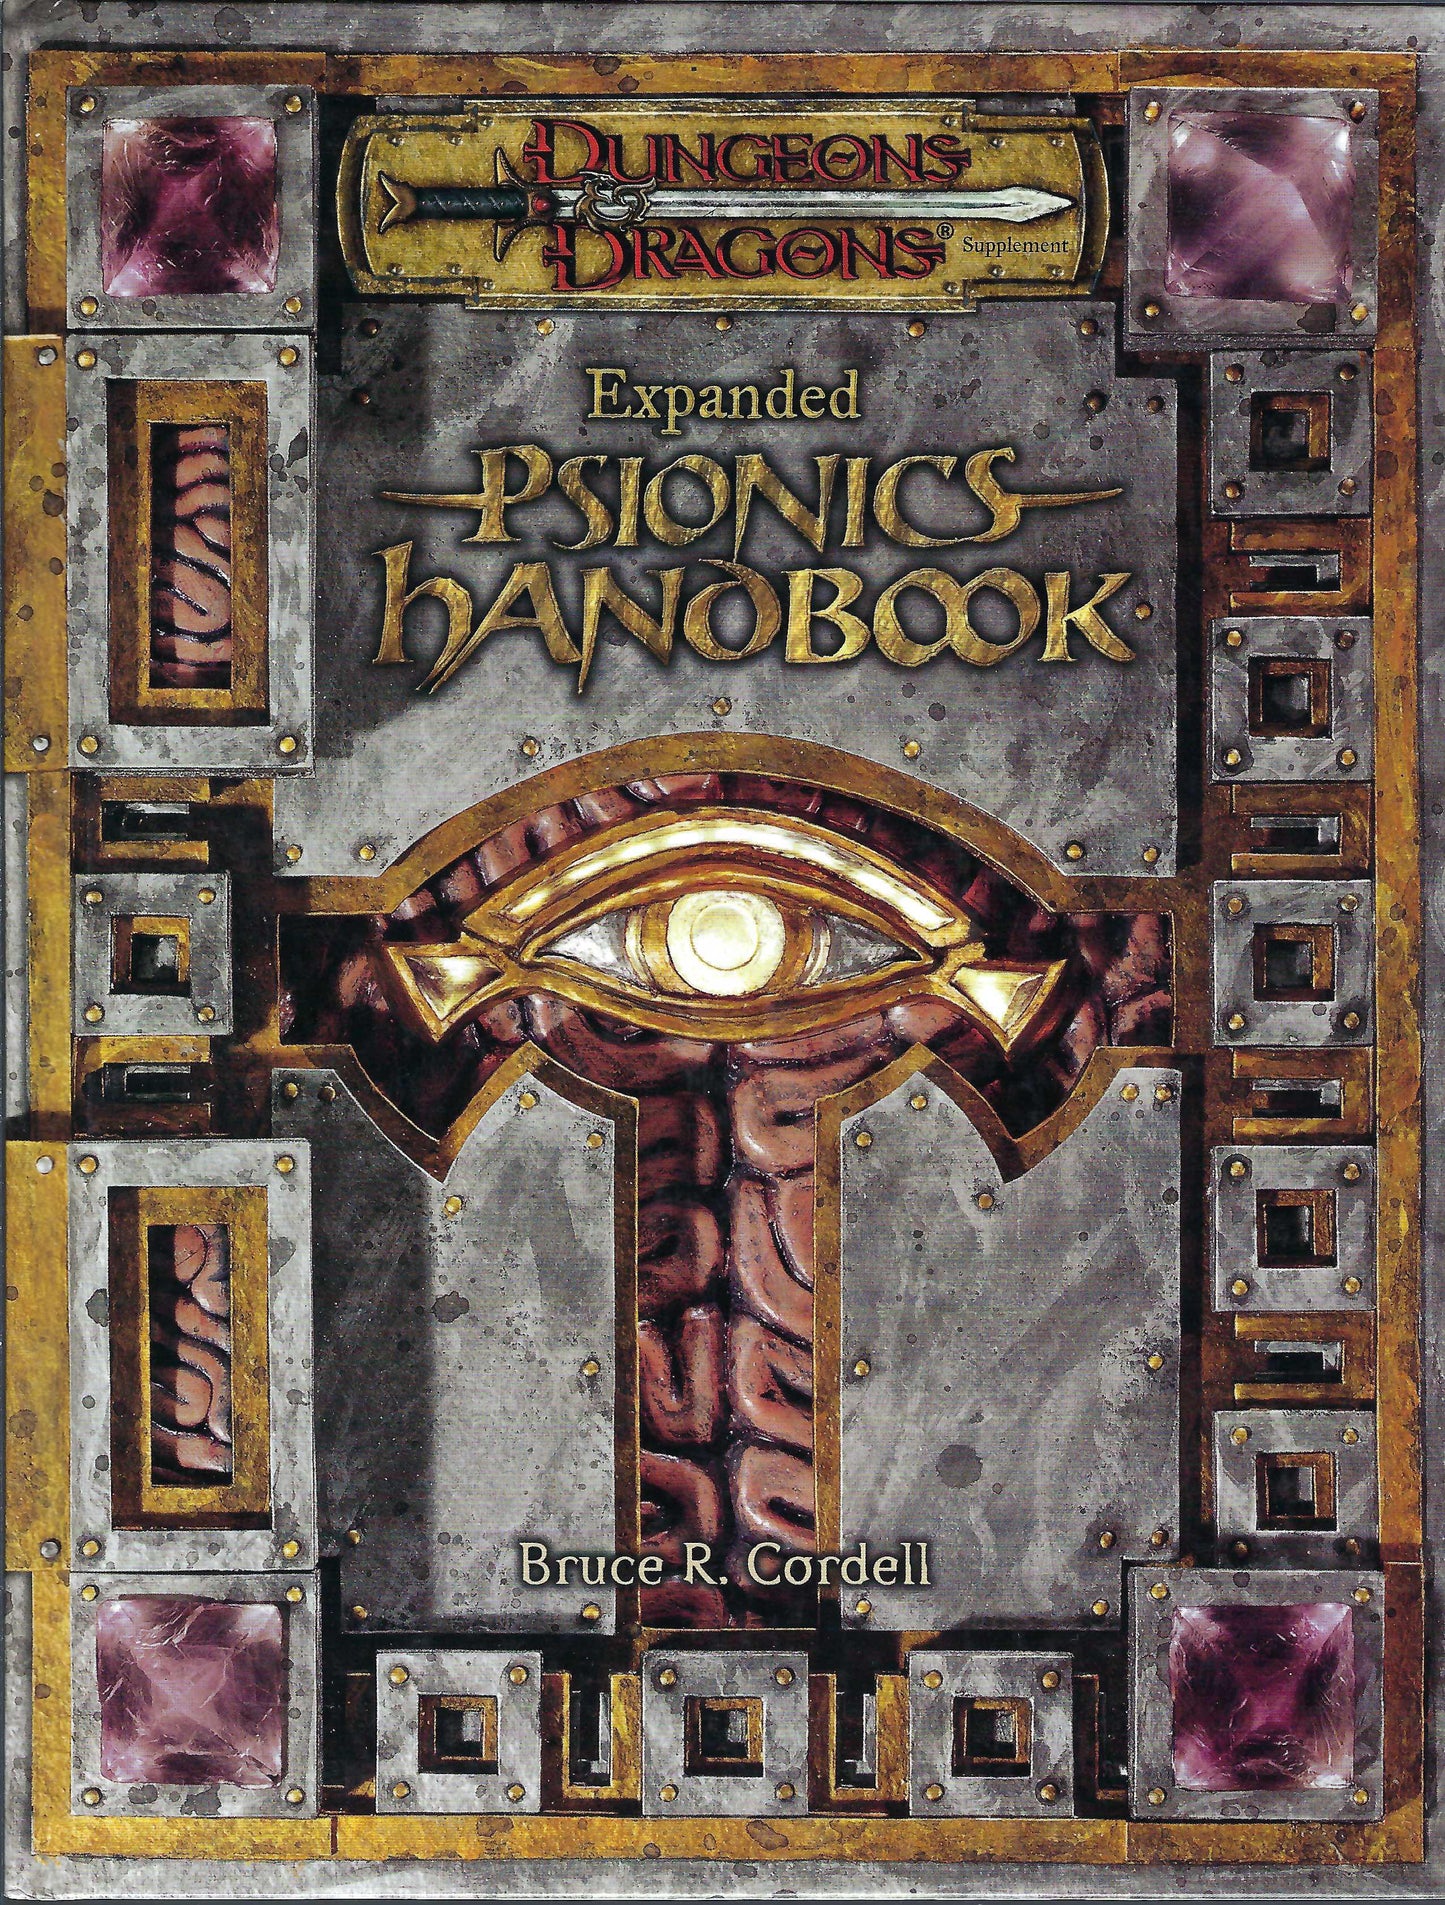 Expanded Psionics Handbook (Dungeons & Dragons d20 3.5)